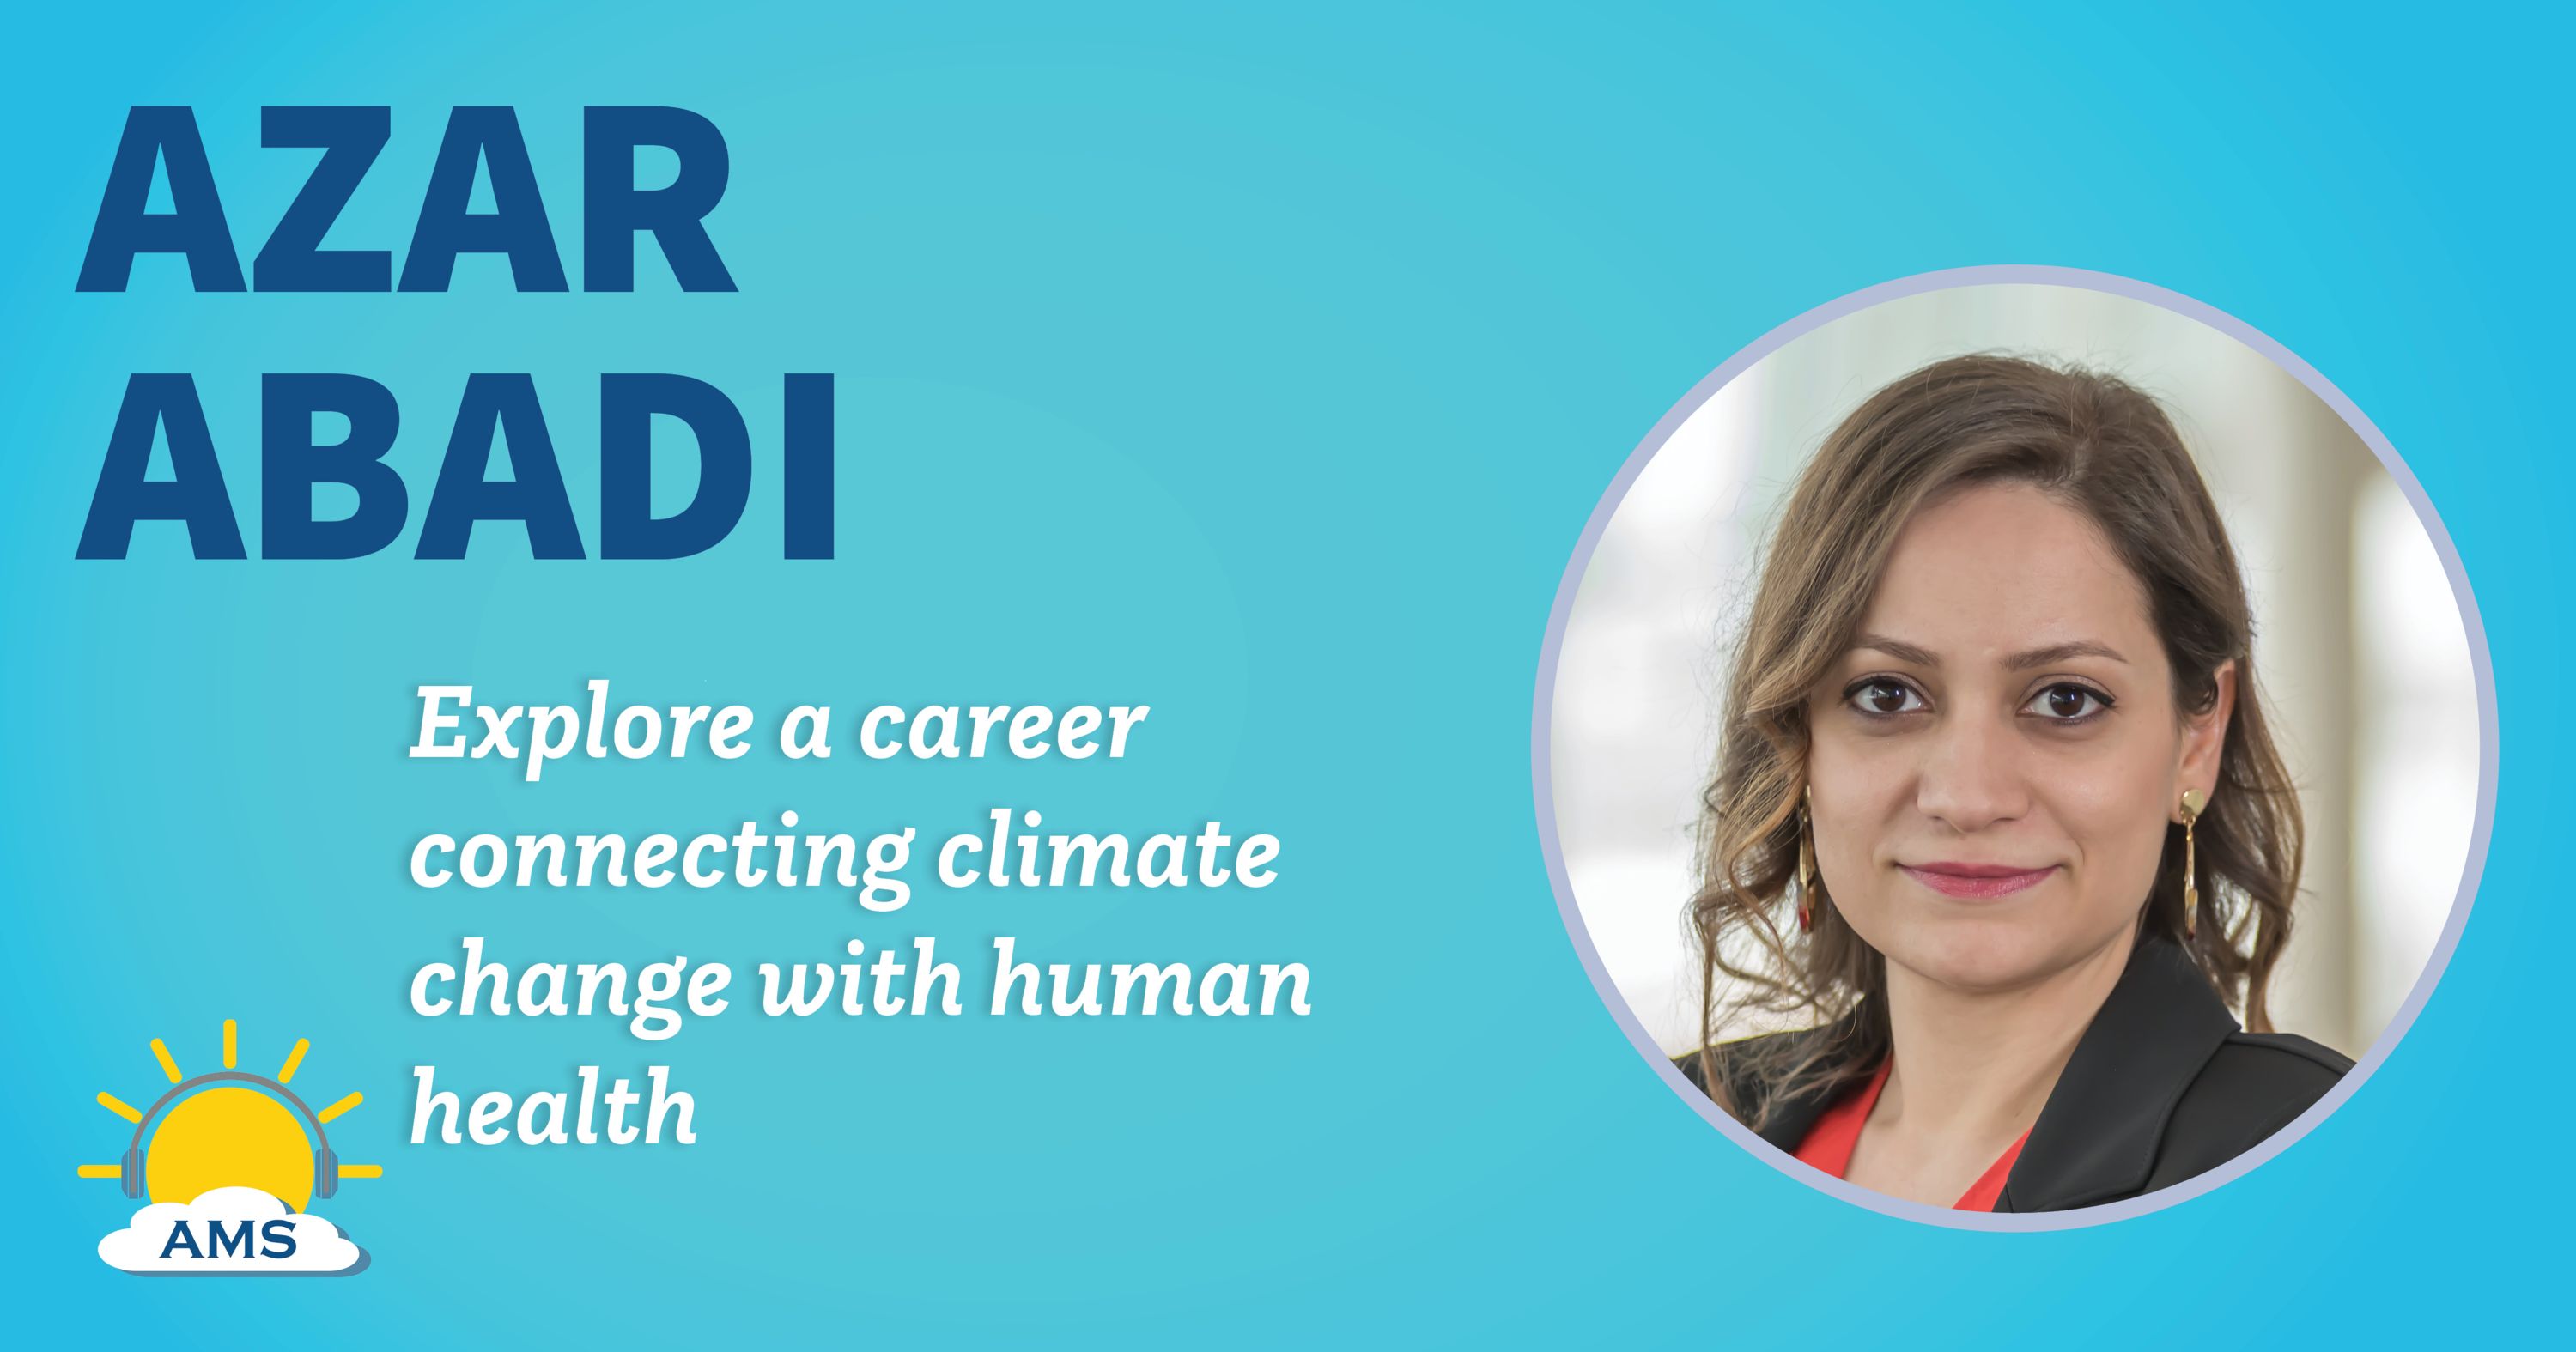 azar abadi headshot graphic with teaser text that reads &quotlearn about a career connecting climate change with human health"